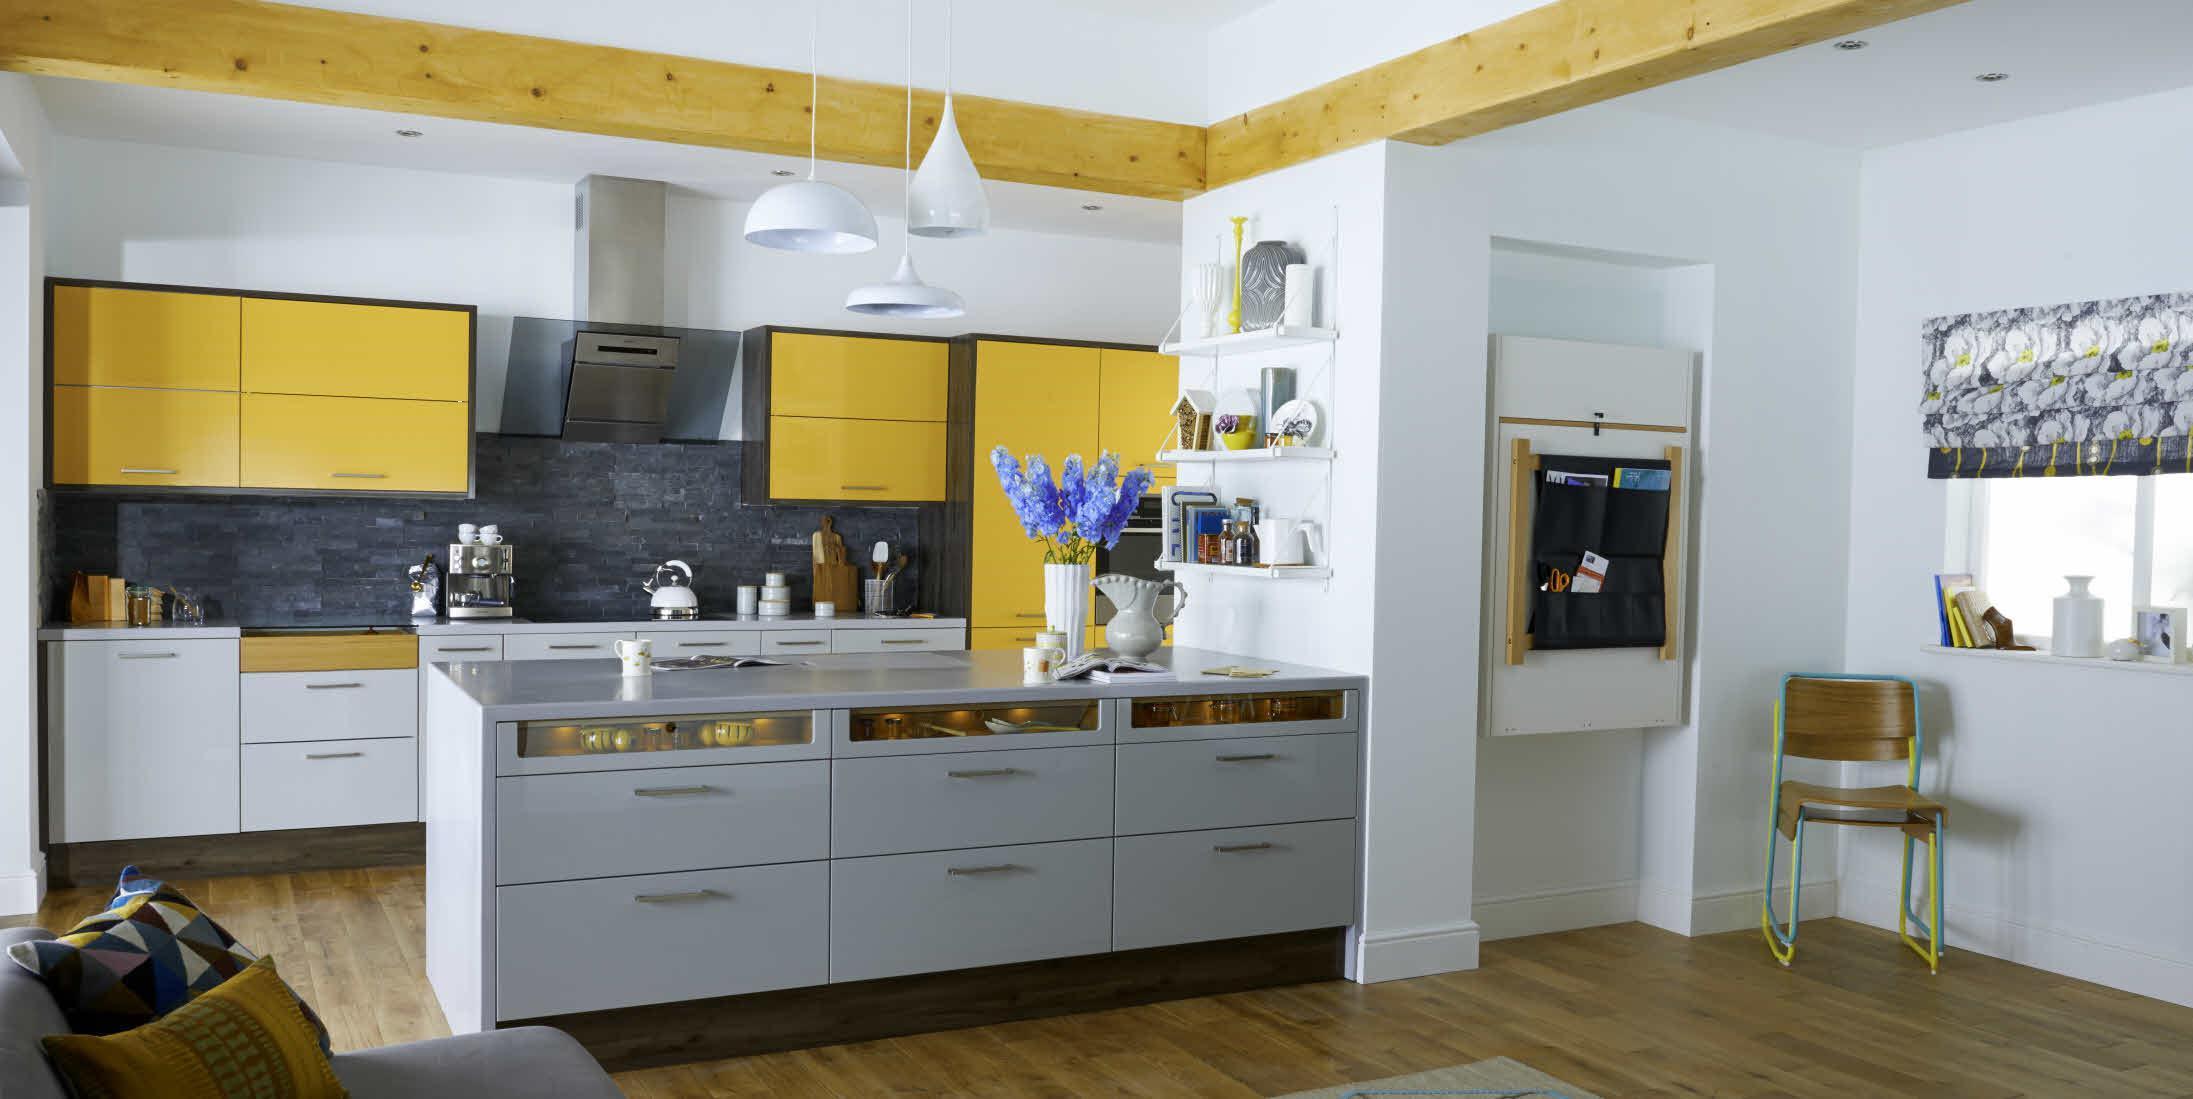 The illuminating yellow o the cupboard shall put a smile on your face when you walk into the kitchen every morning 